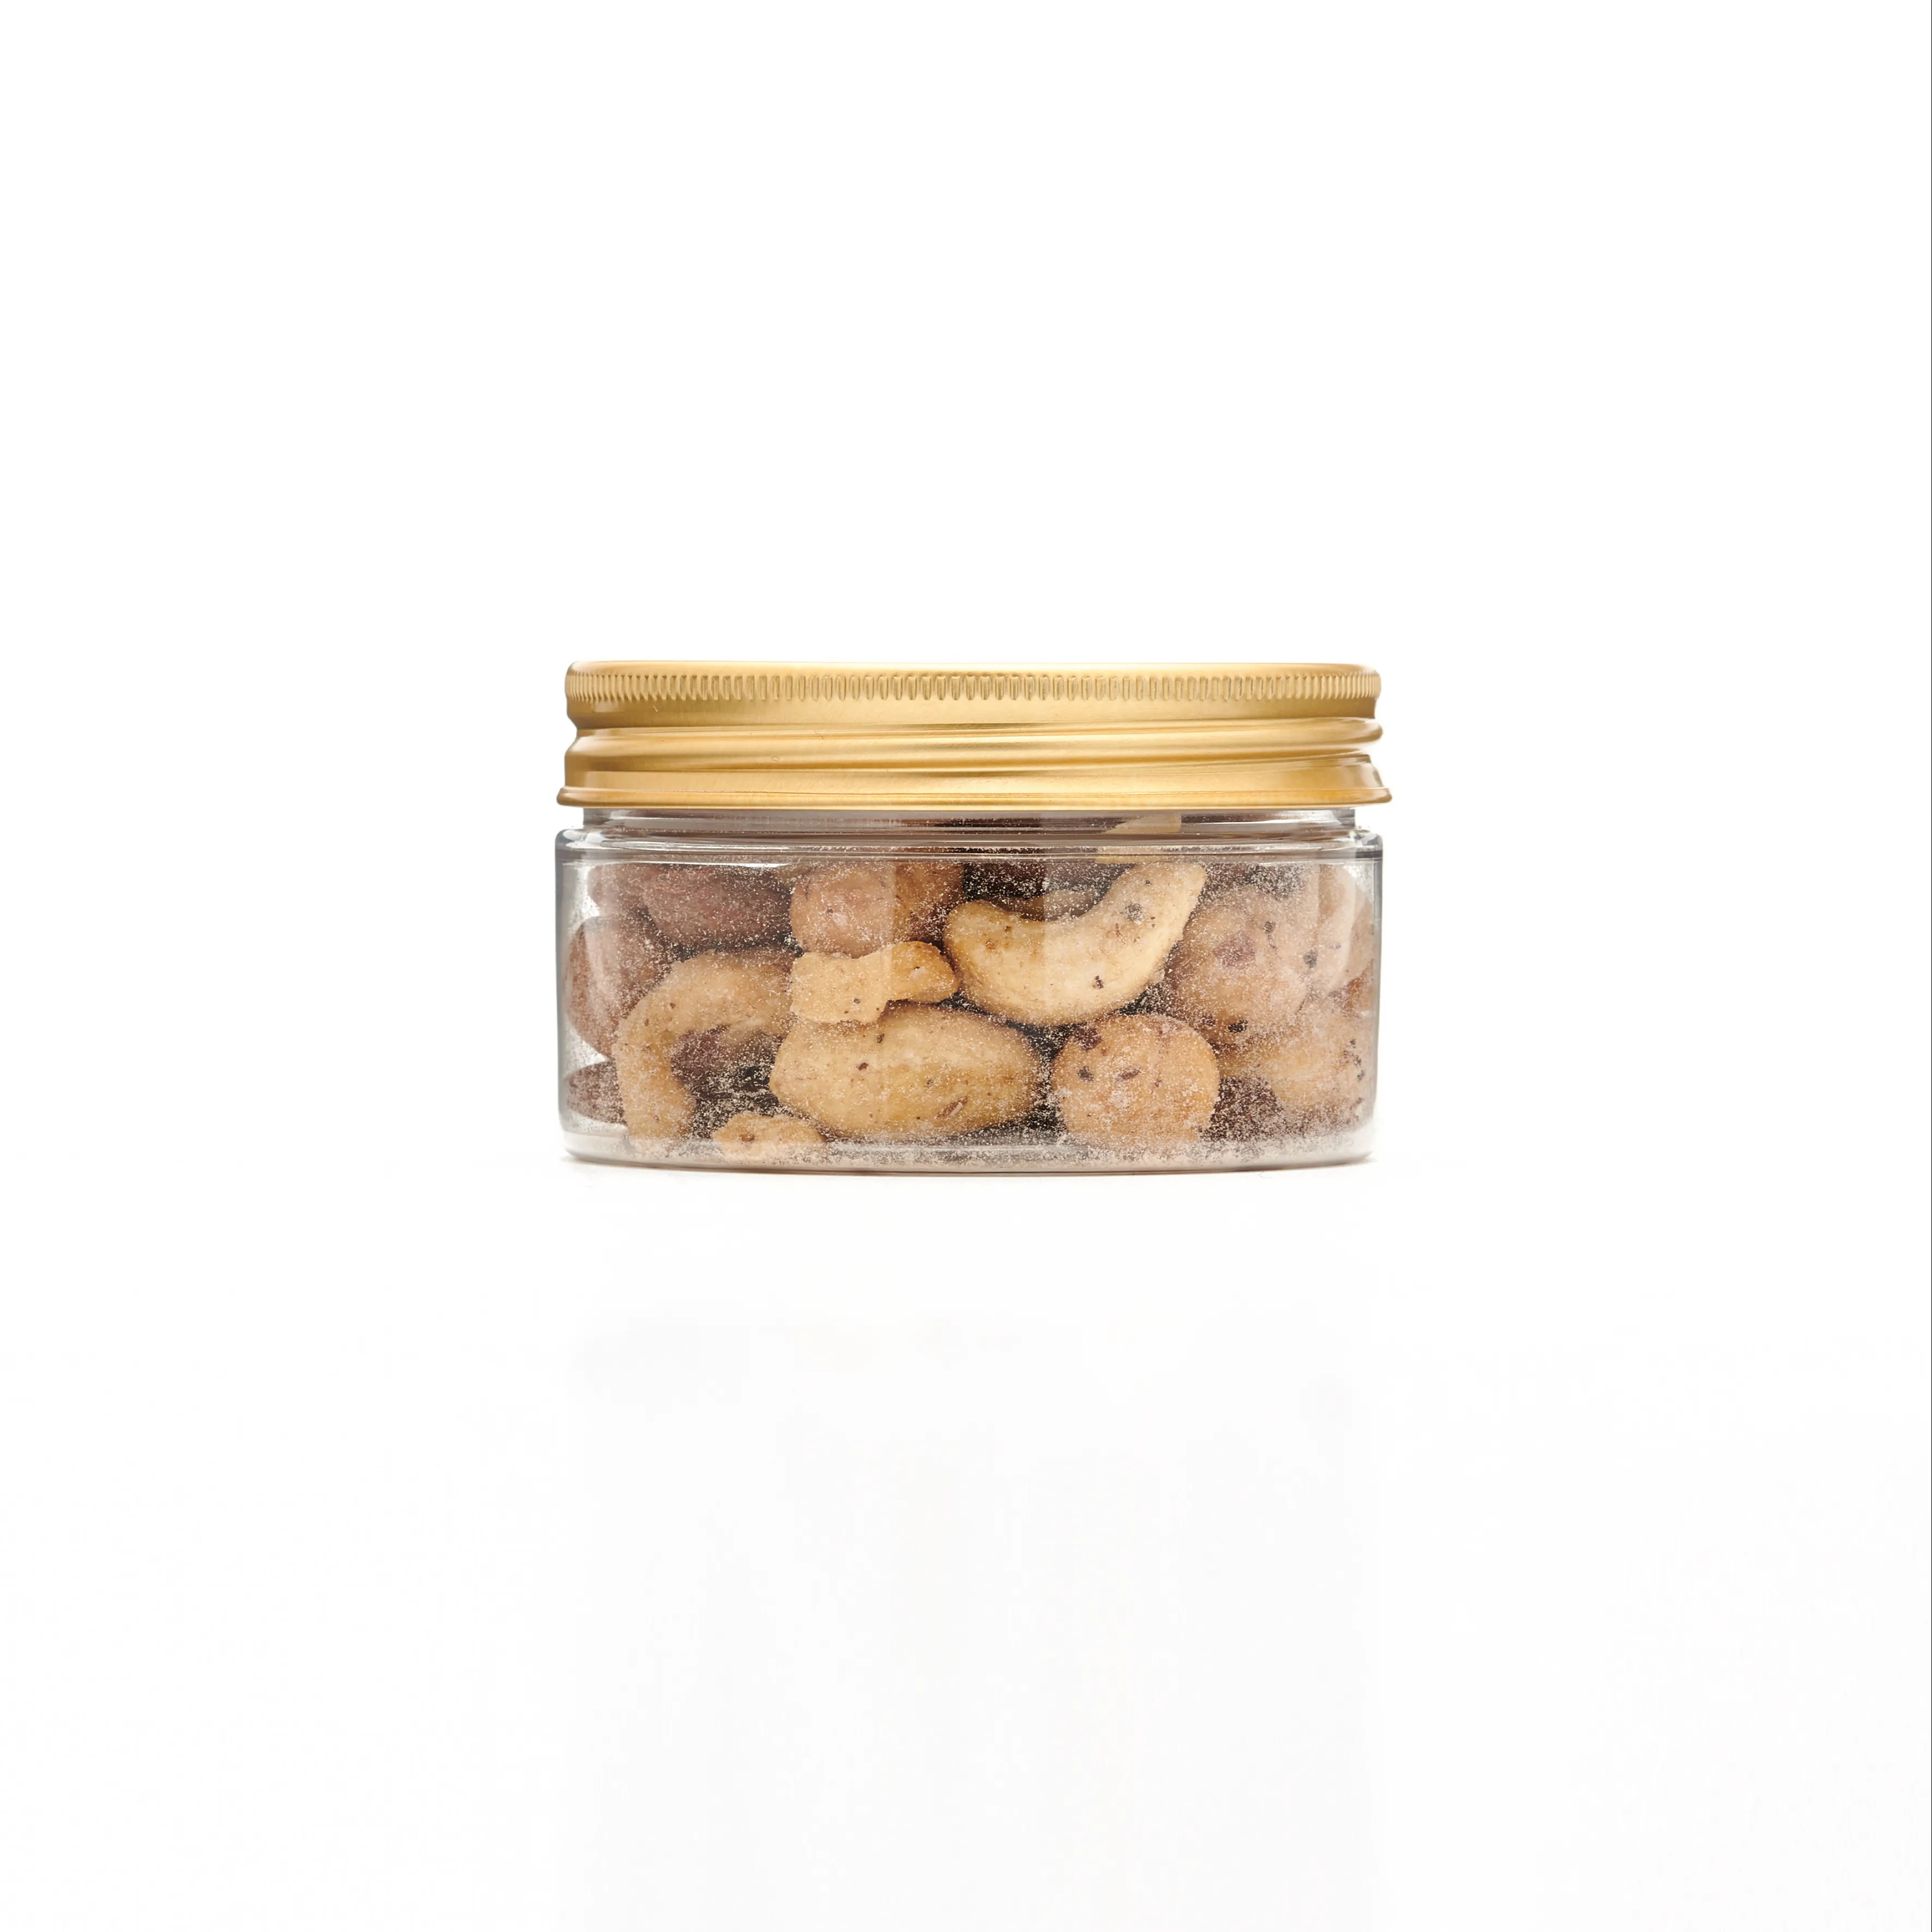 Mixed Nuts with Truffle Premium Quality Salted Snack 50g PET Jar Packaging Made in Italy for Wholesale and Export